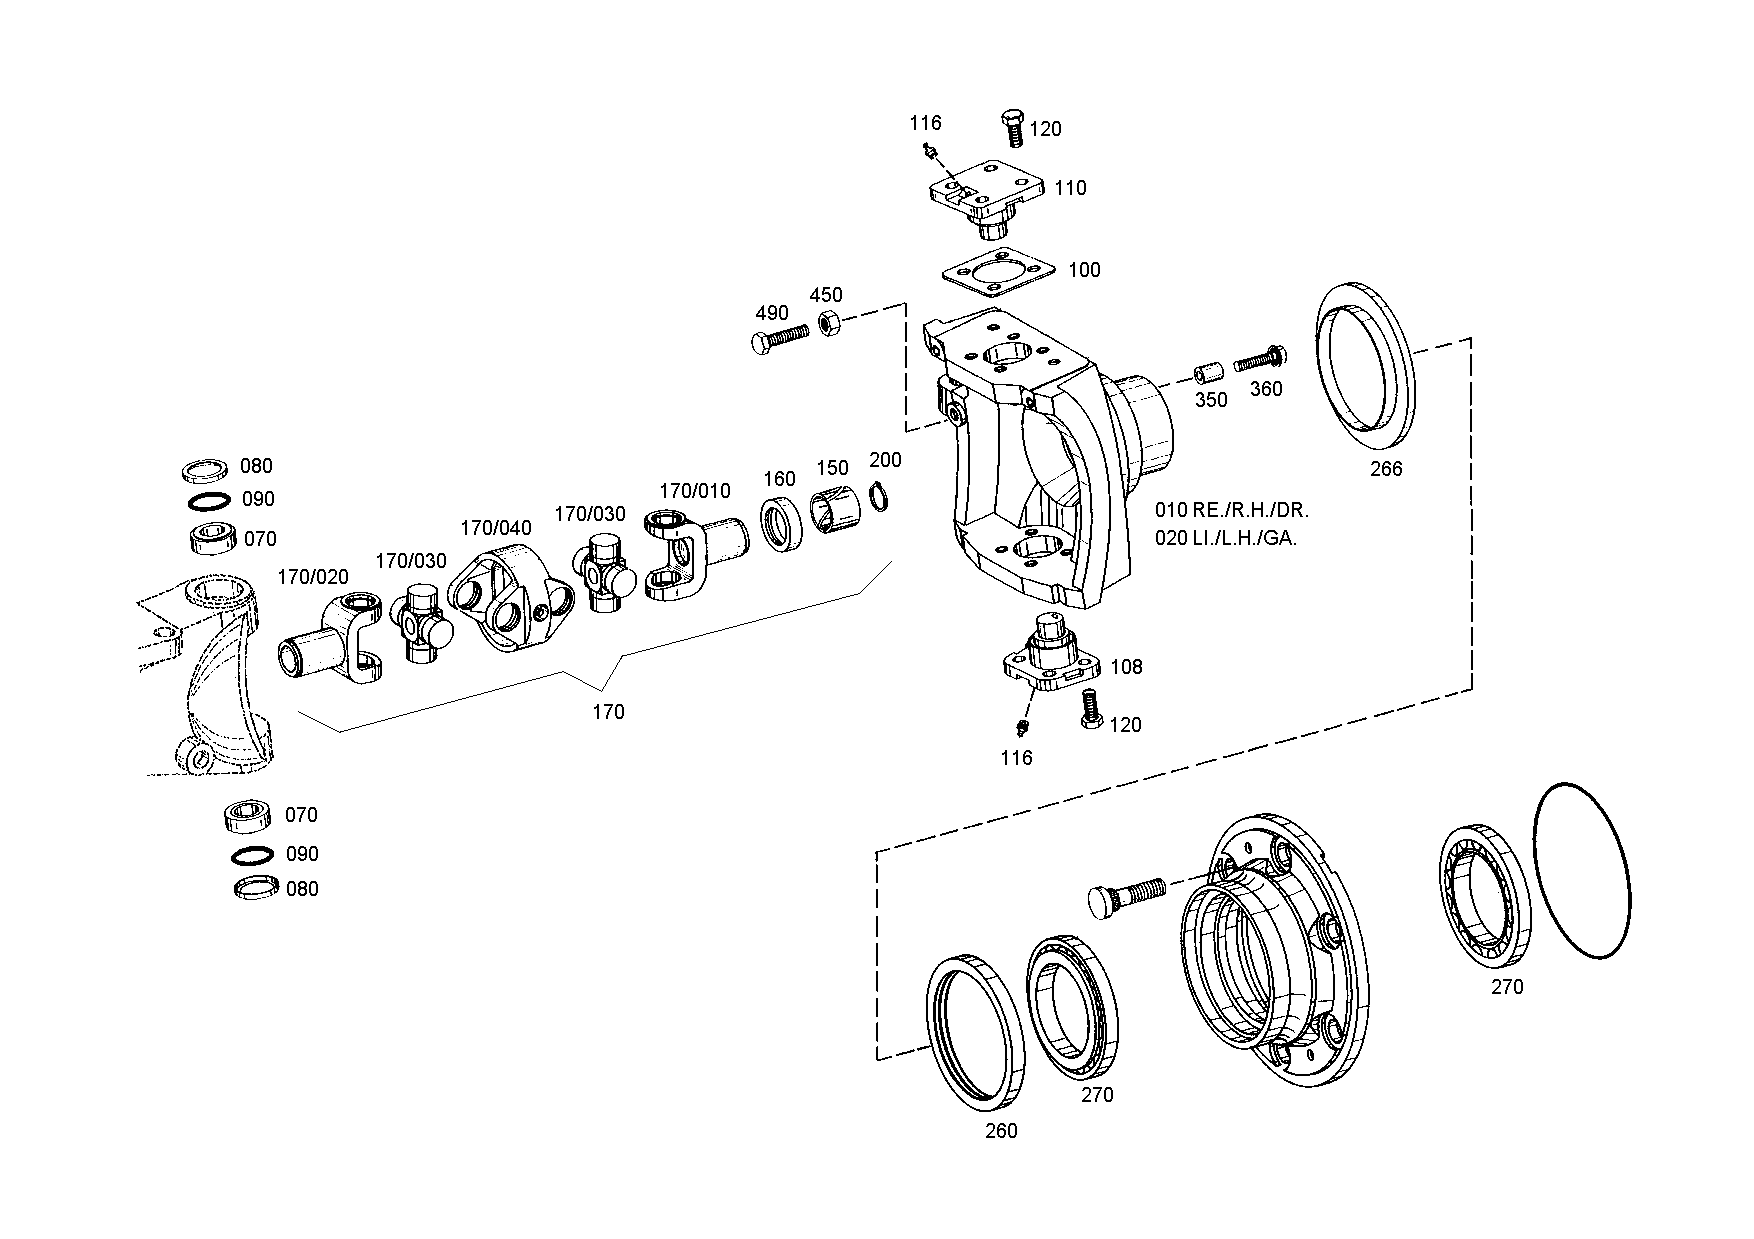 drawing for LIEBHERR GMBH 7619826 - SPIDER (figure 2)